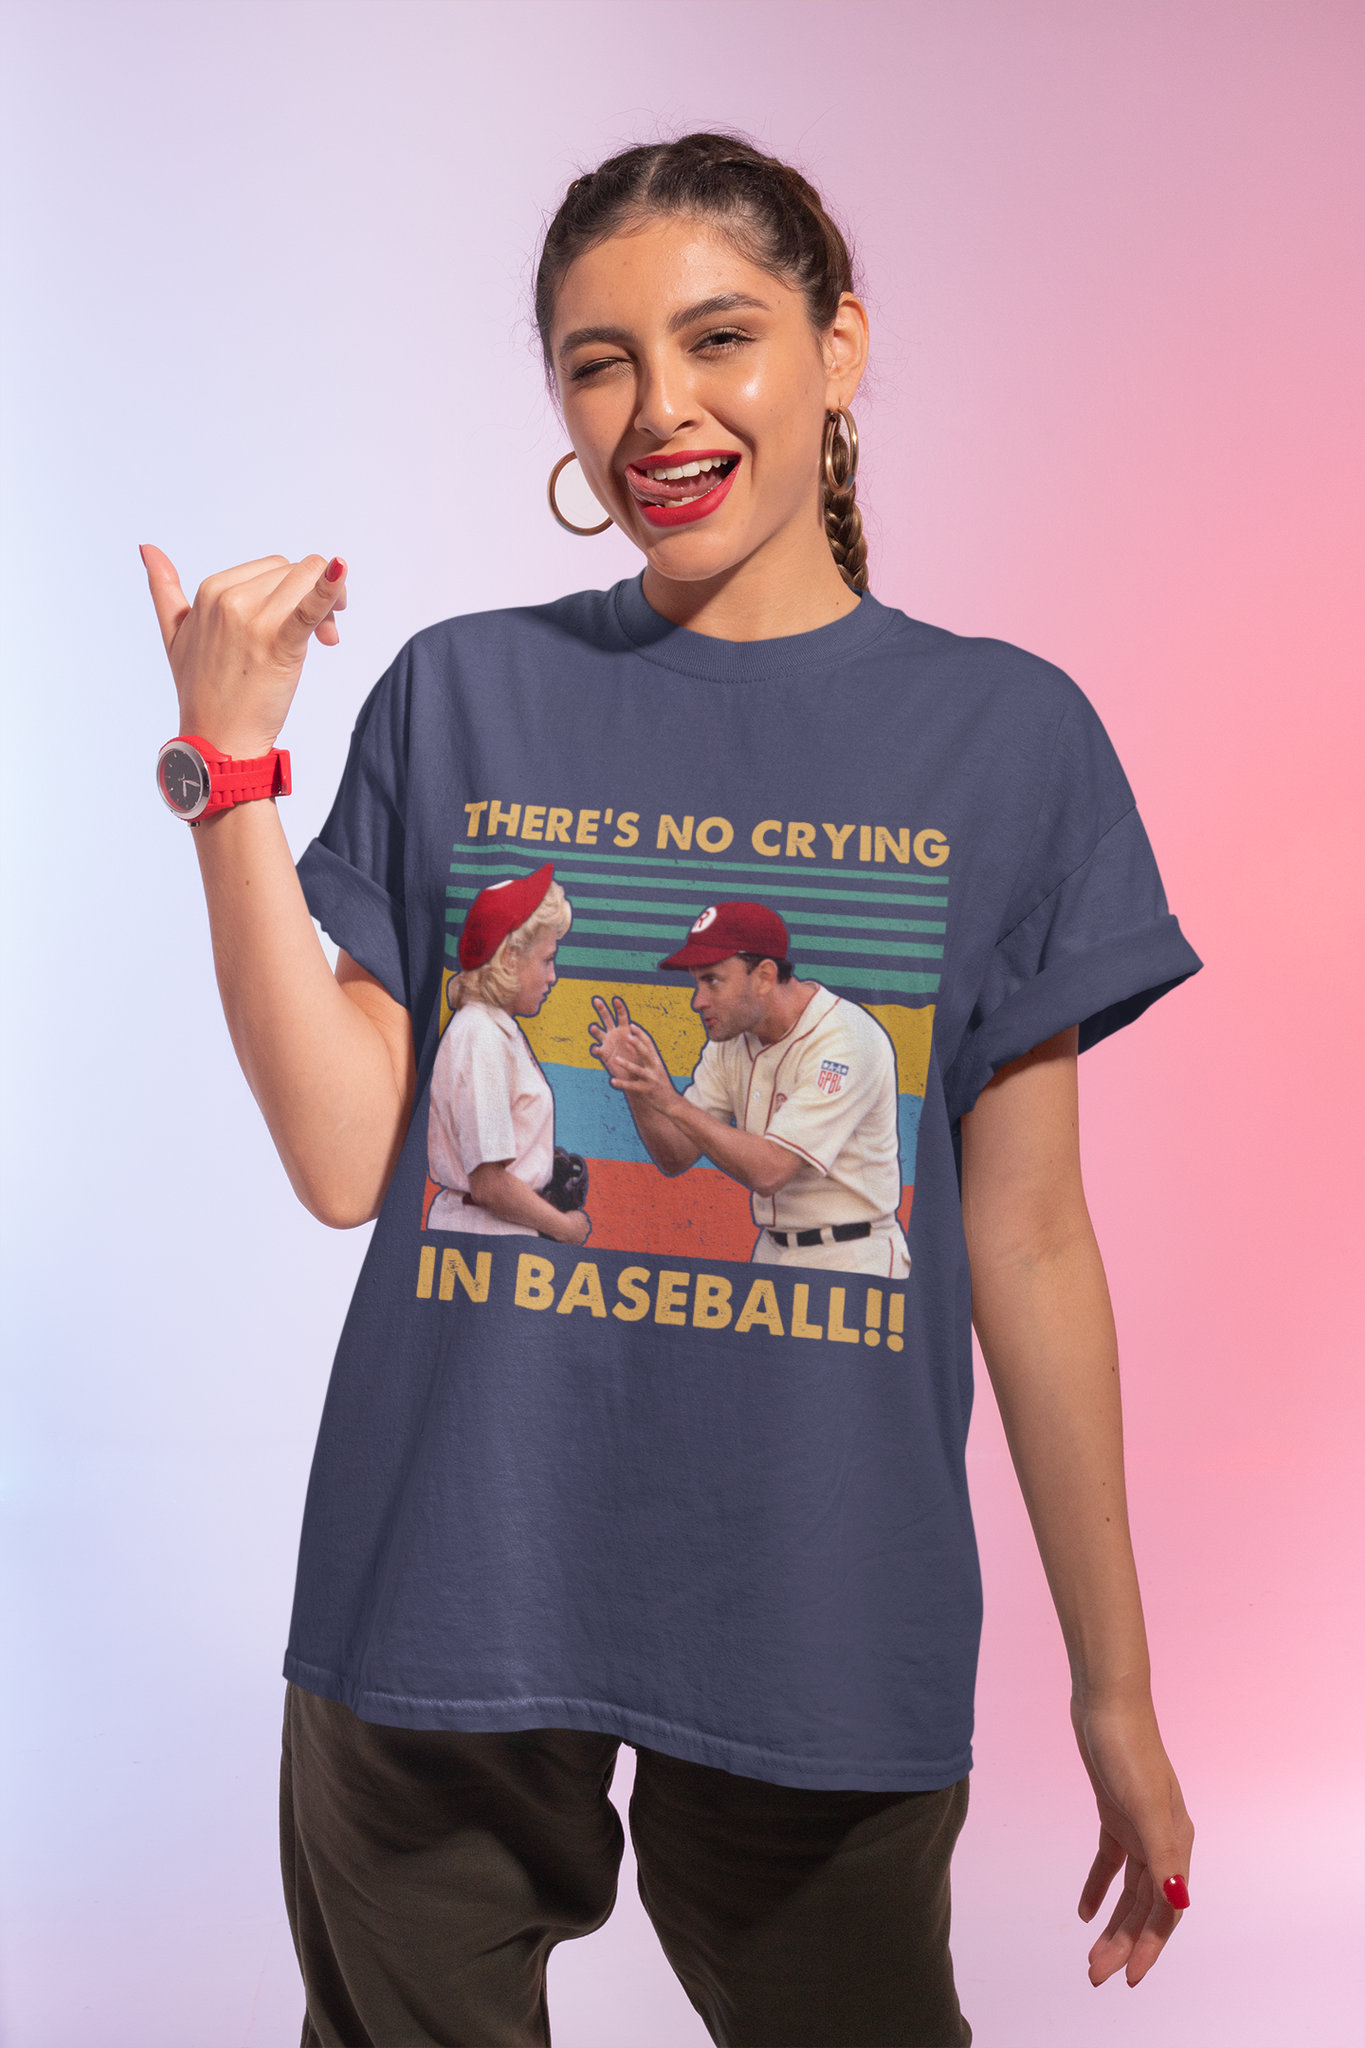 A League Of Their Own Vintage T Shirt, Evelyn Gardner Jimmy Dugan Tshirt, Theres No Crying In Baseball T Shirt